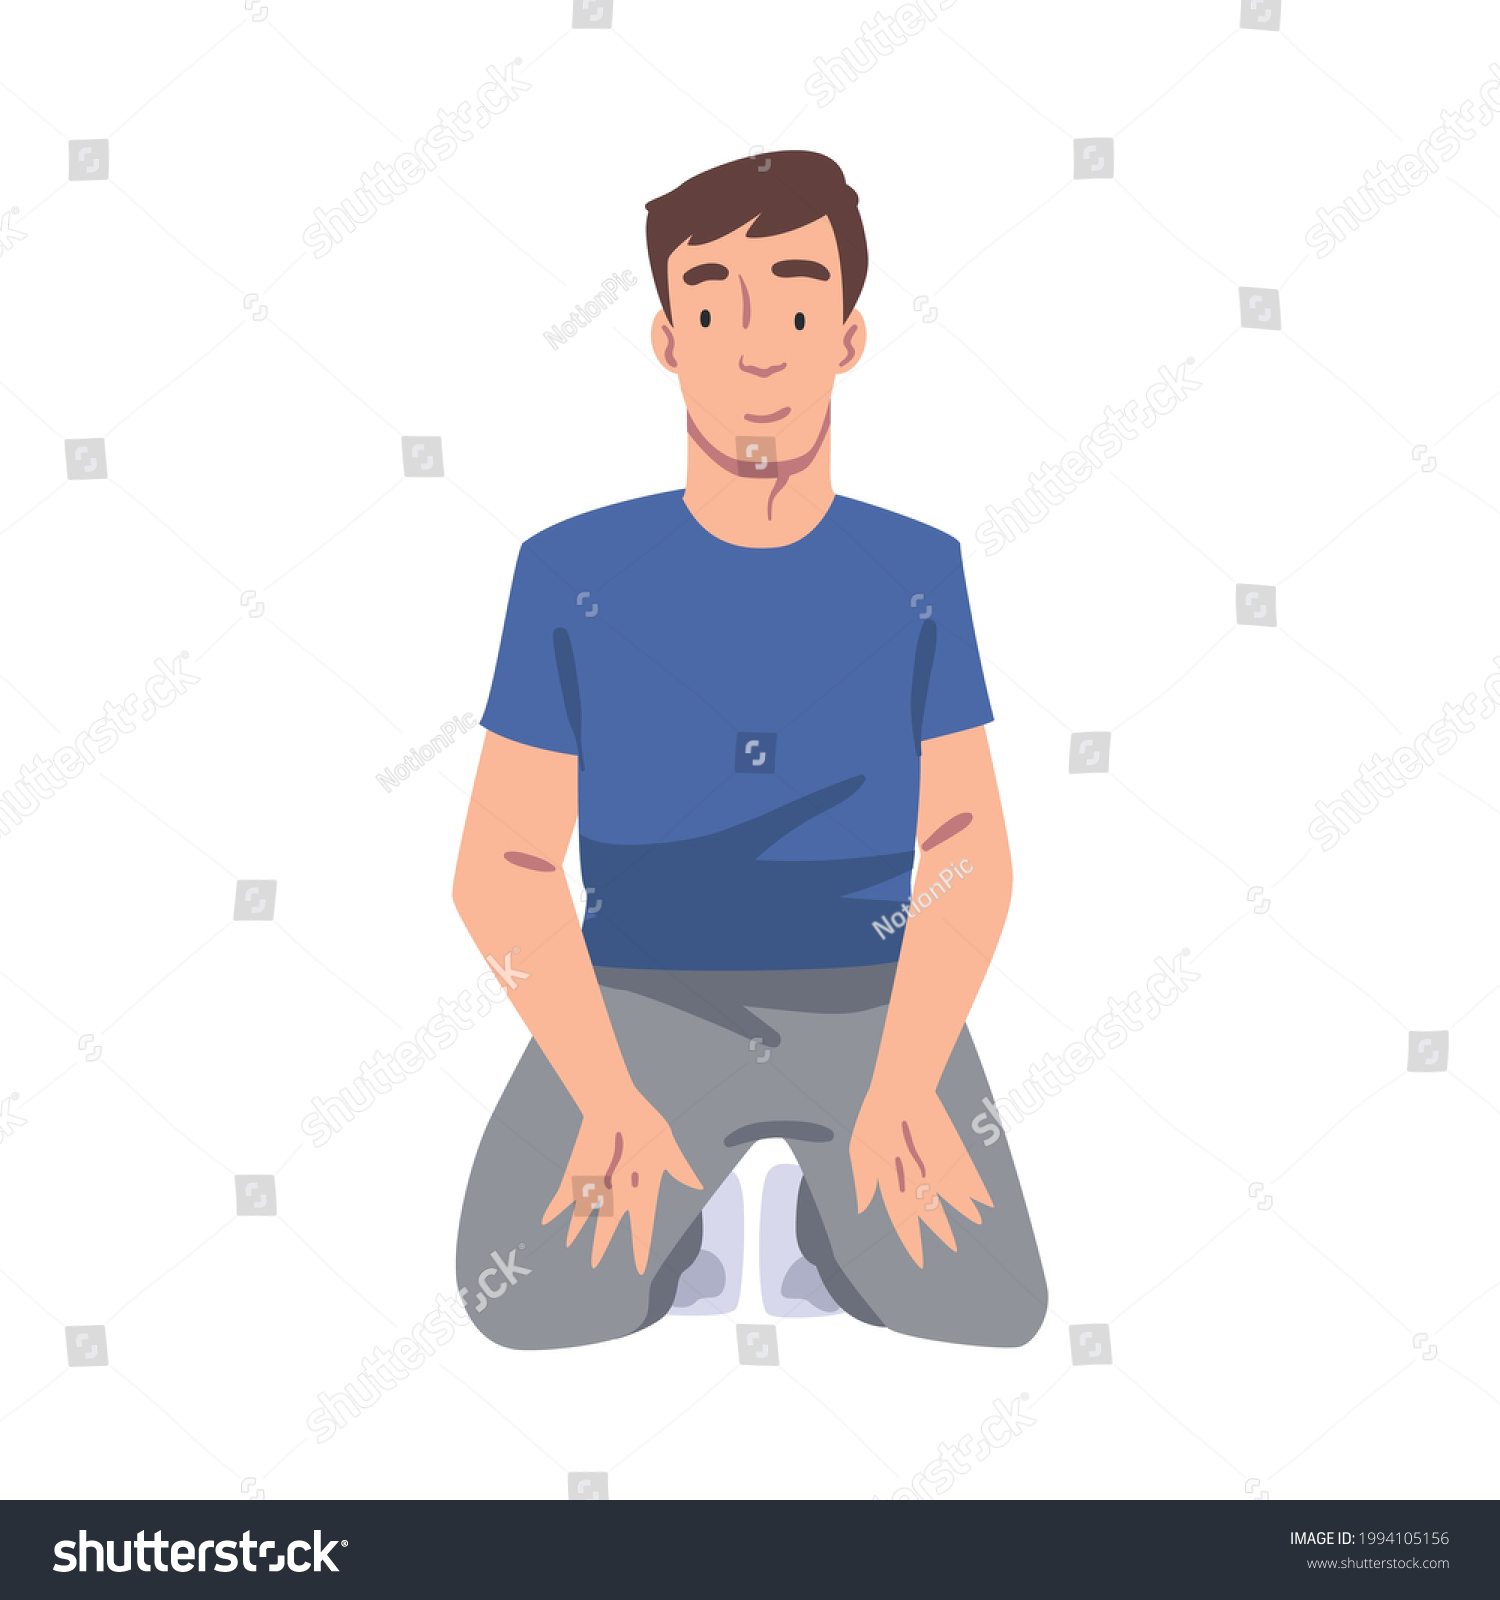 Sitting on one knee Images, Stock Photos & Vectors Shutterstock